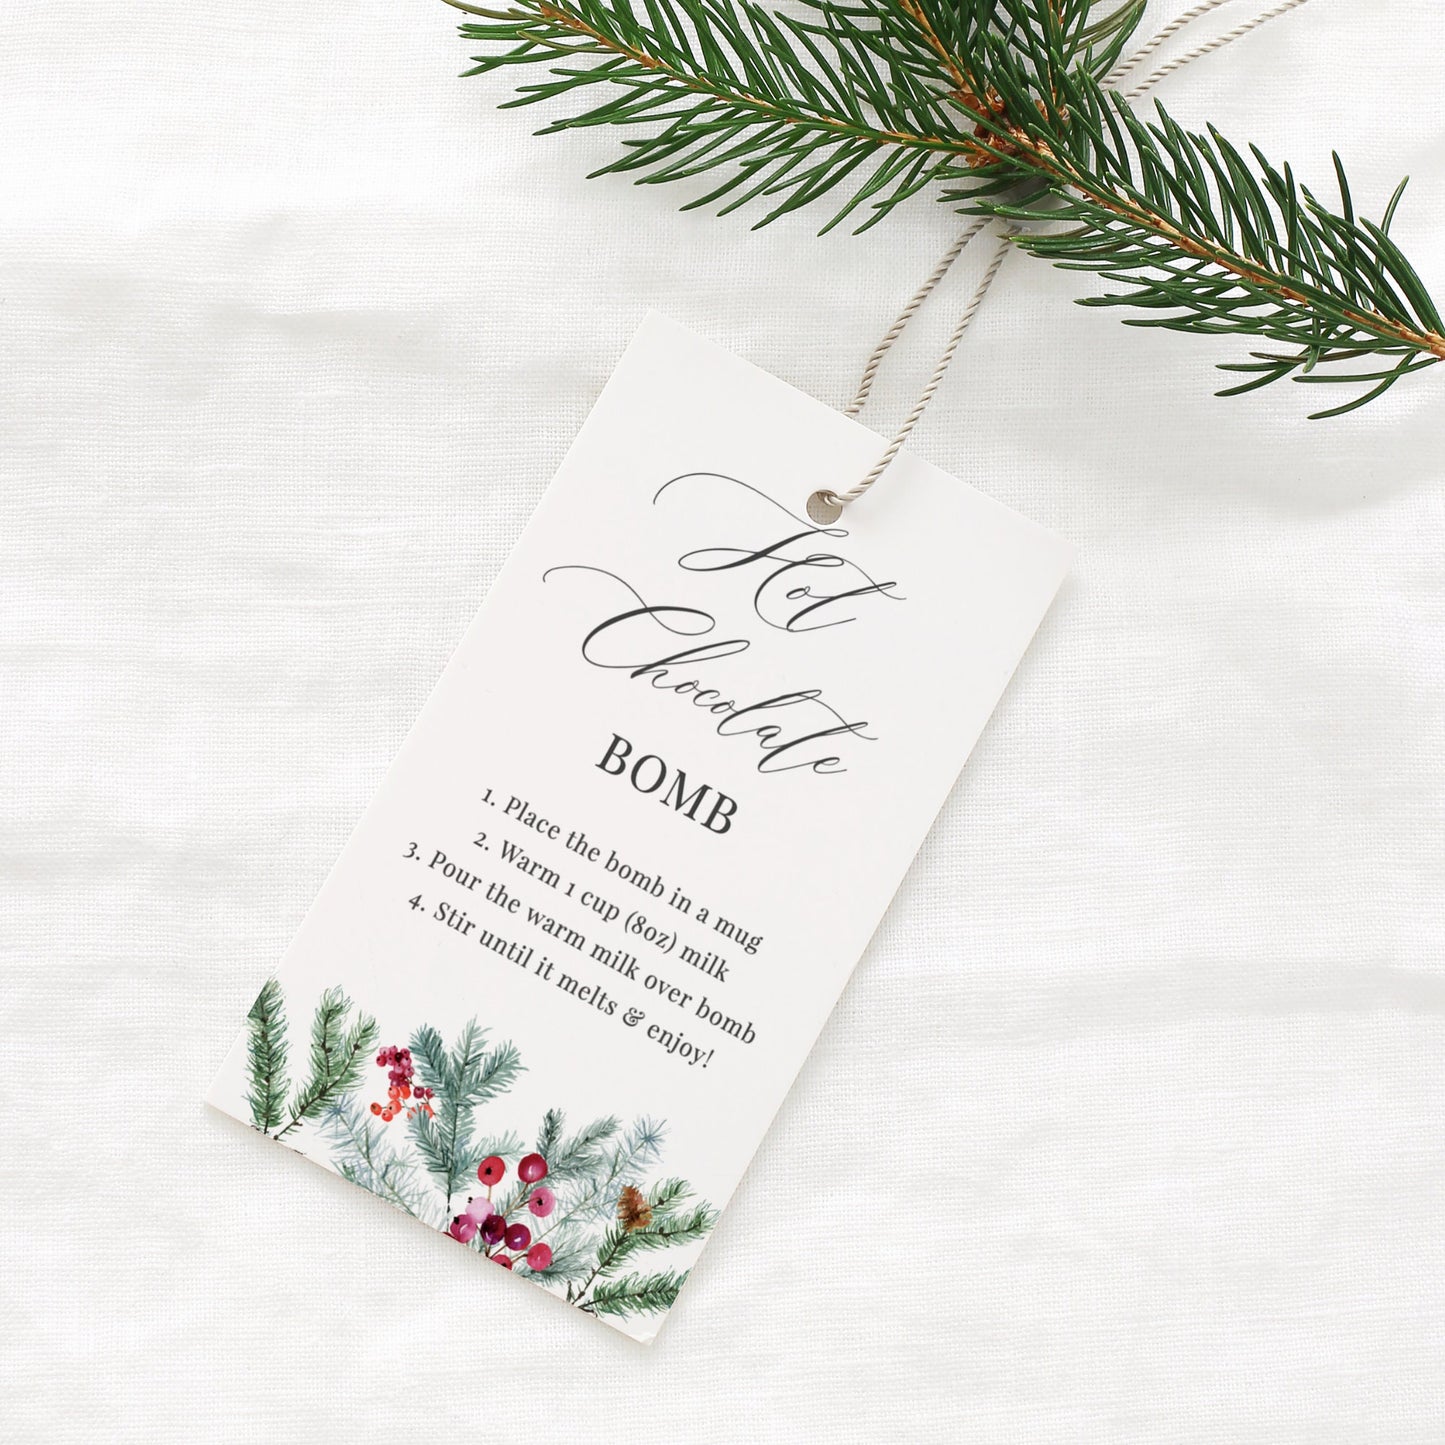 Editable Christmas Hot Chocolate Bomb Tag Hot Cocoa Favor Tags Bomb Directions Tags Winter Pine Trees Template